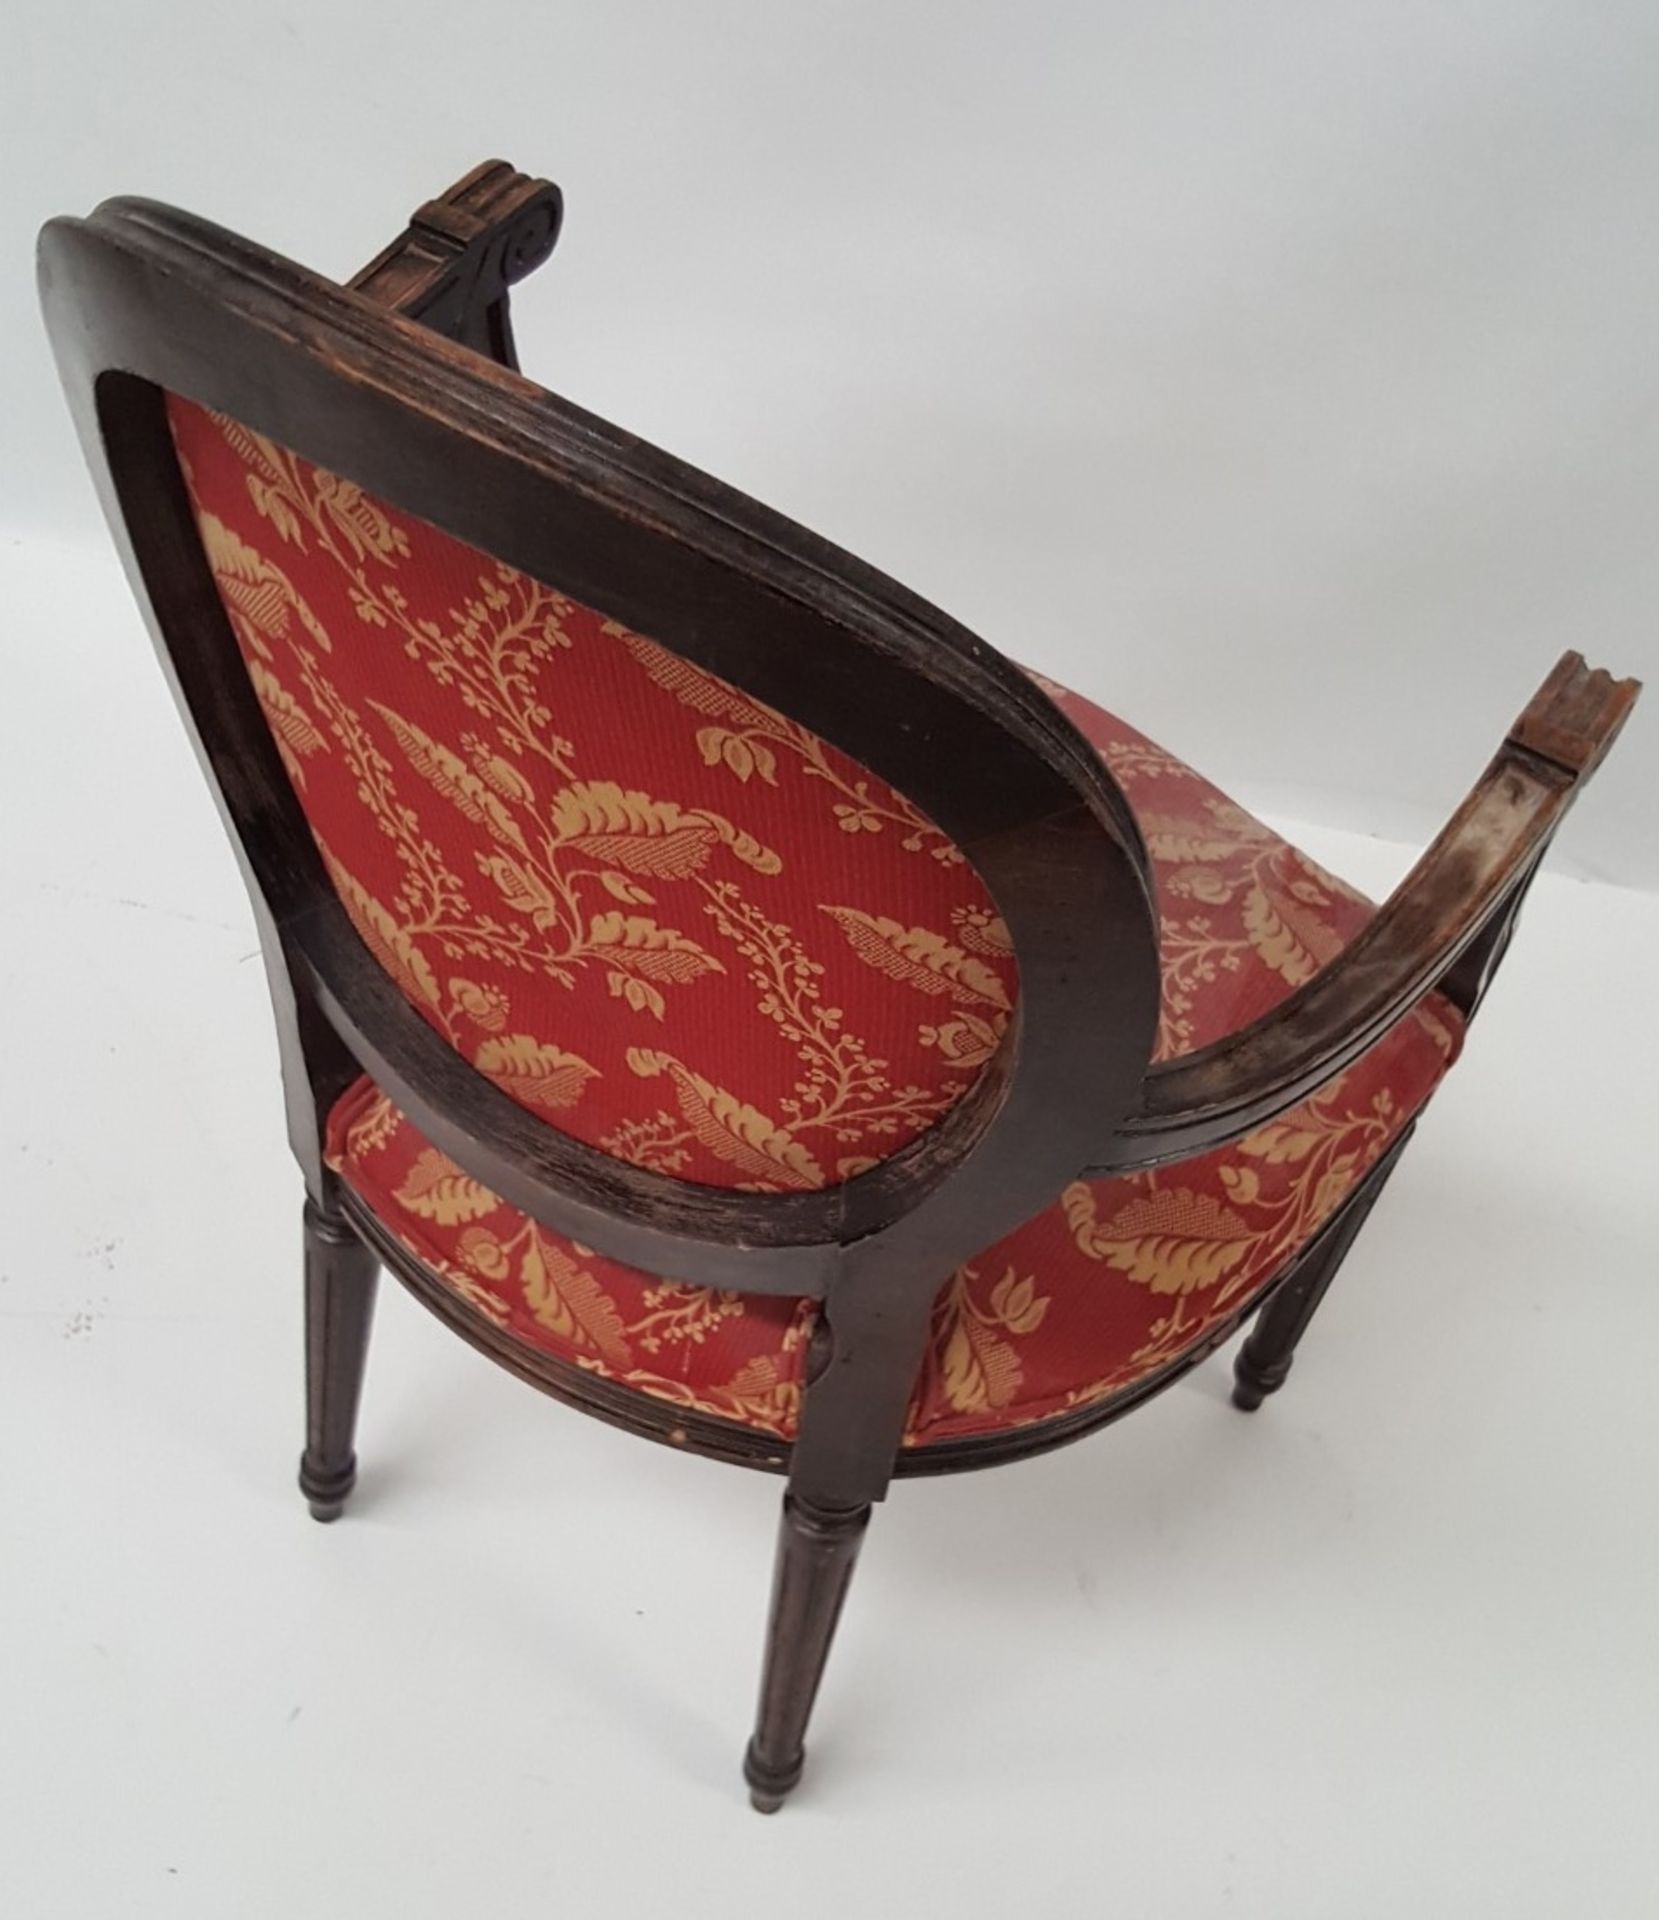 6 x Antique Style Wooden Chairs Upholstered In Red Fabric With Gold Leaf Design - CL431 - Image 6 of 8